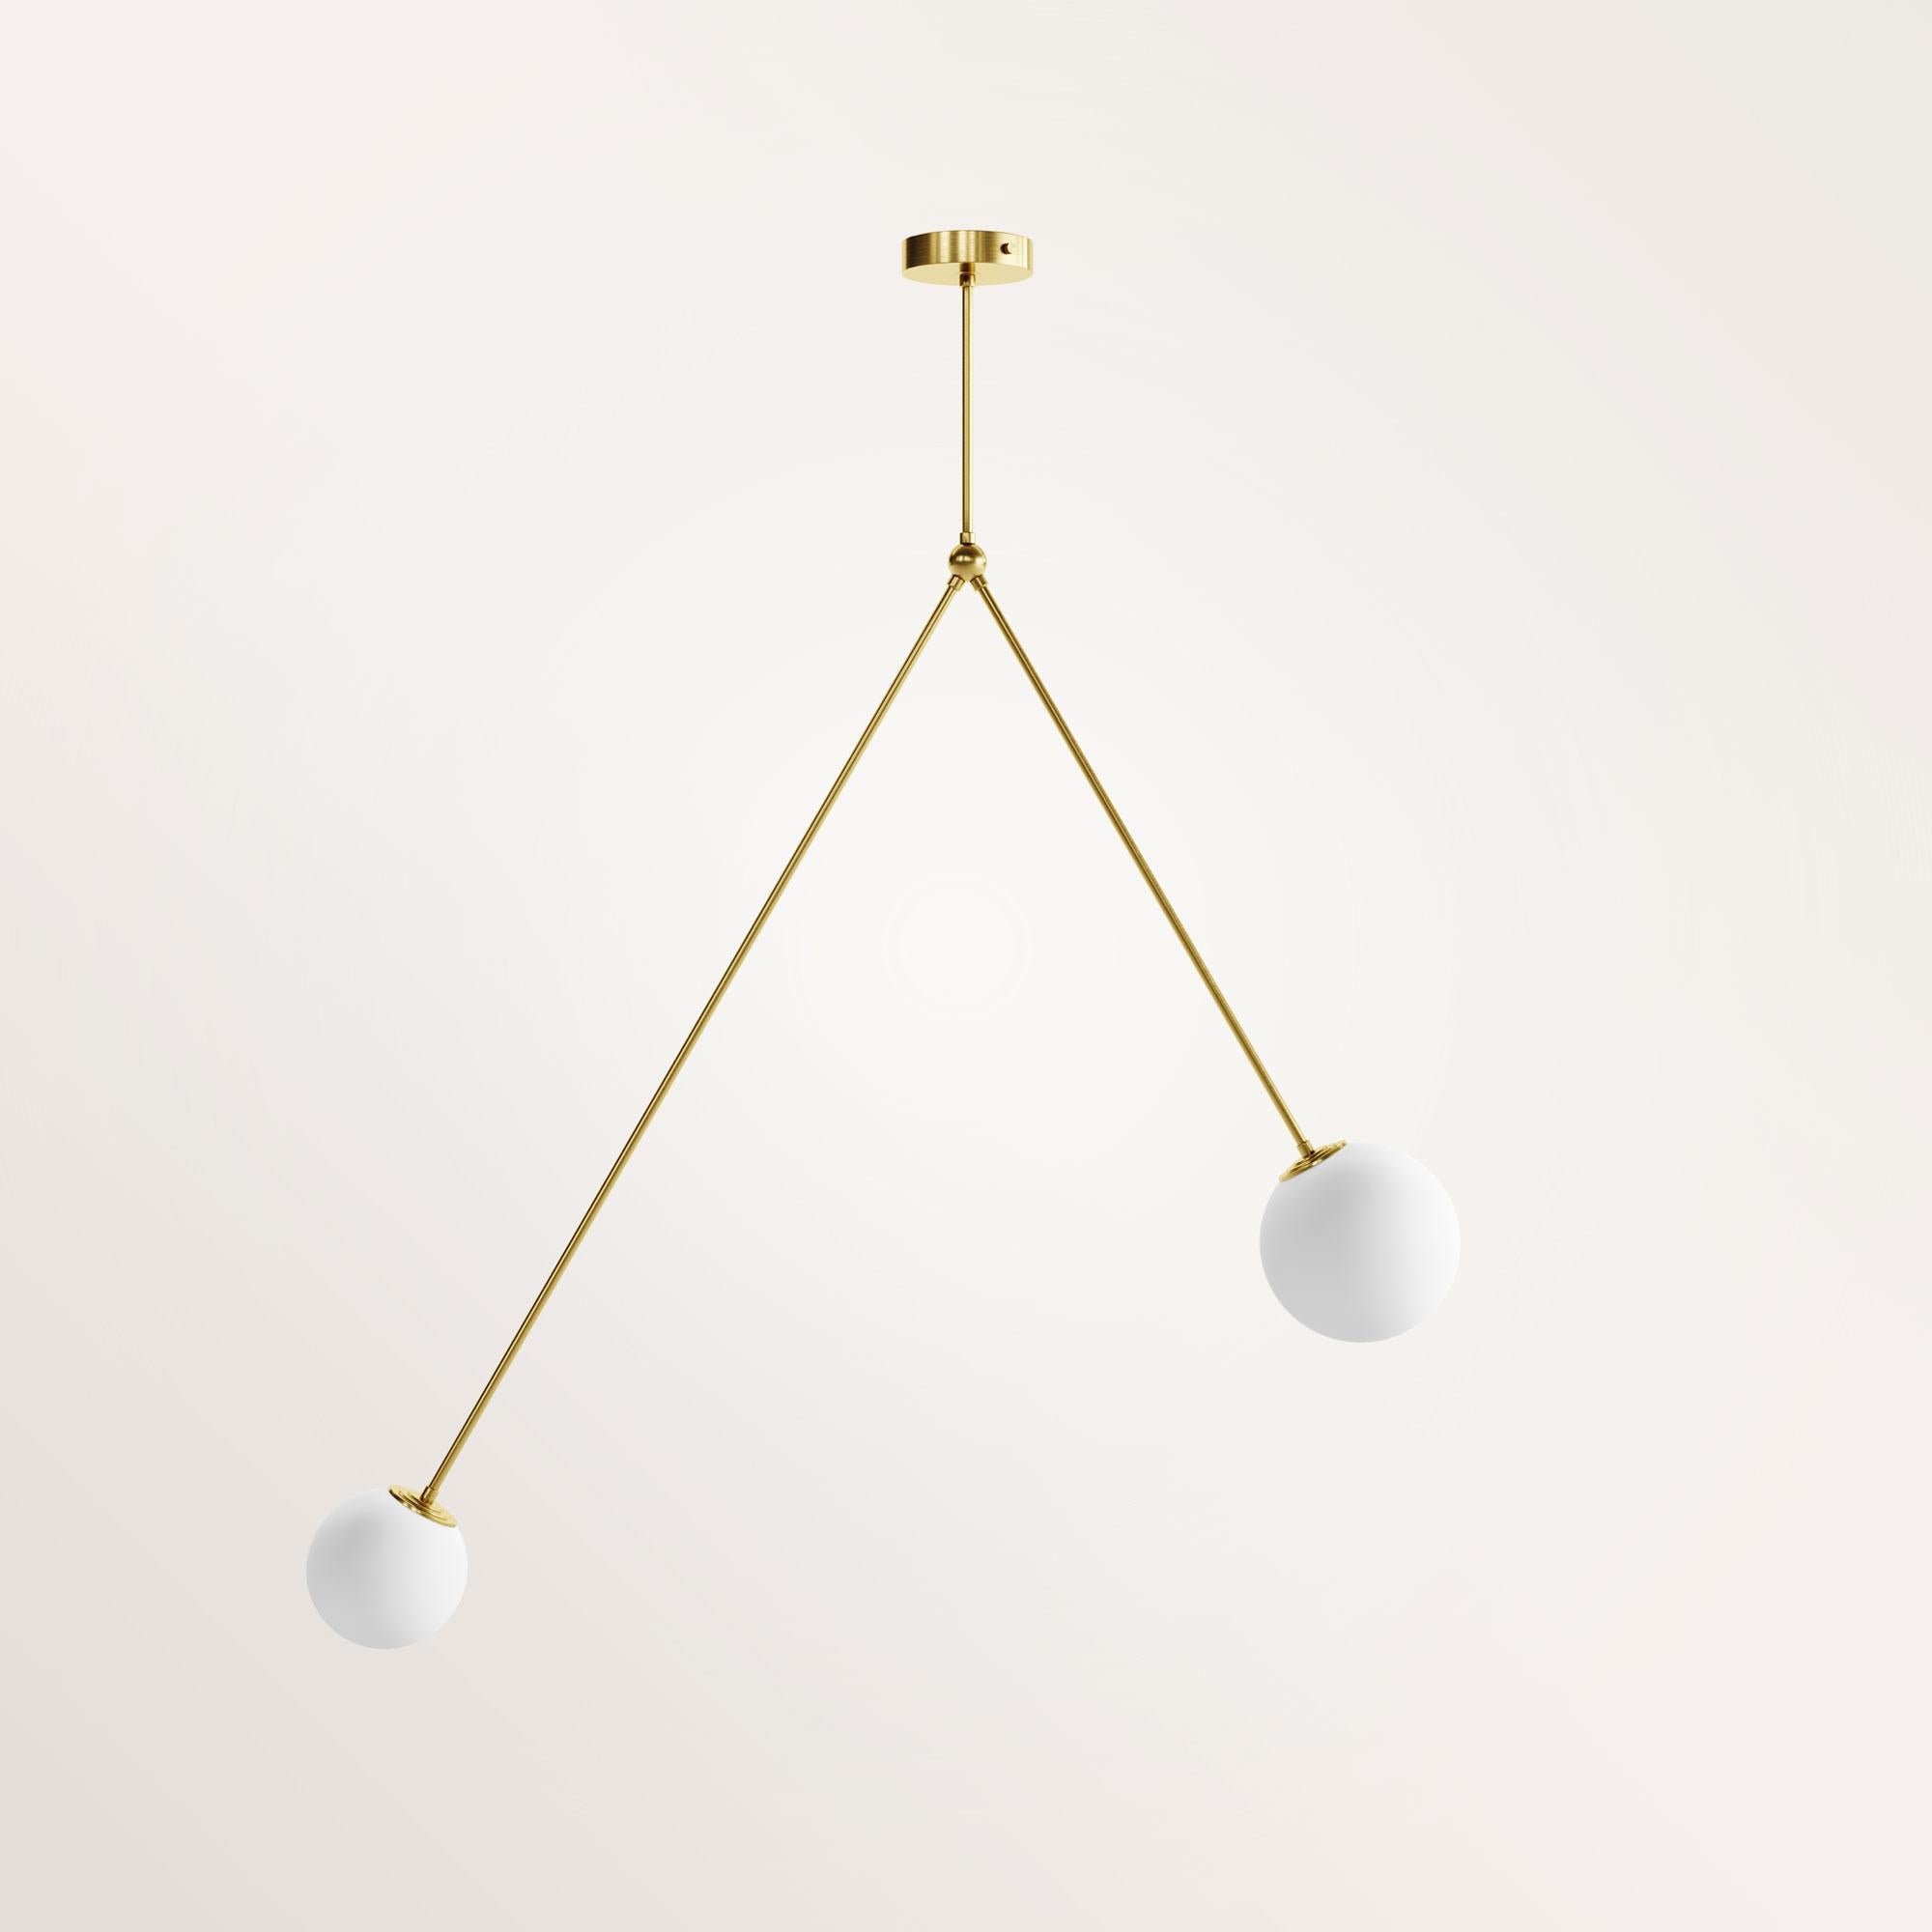 Handmade Dioscuri chandelier by Gobo Lights
Dimensions: 90 L x 12 l x 100 H
Materials: Brass, Opaline

In Greek mythology, Castor and Pollux, called Dioscuri, are the twin sons of Leda.

Self-taught and from the world of chemistry, this